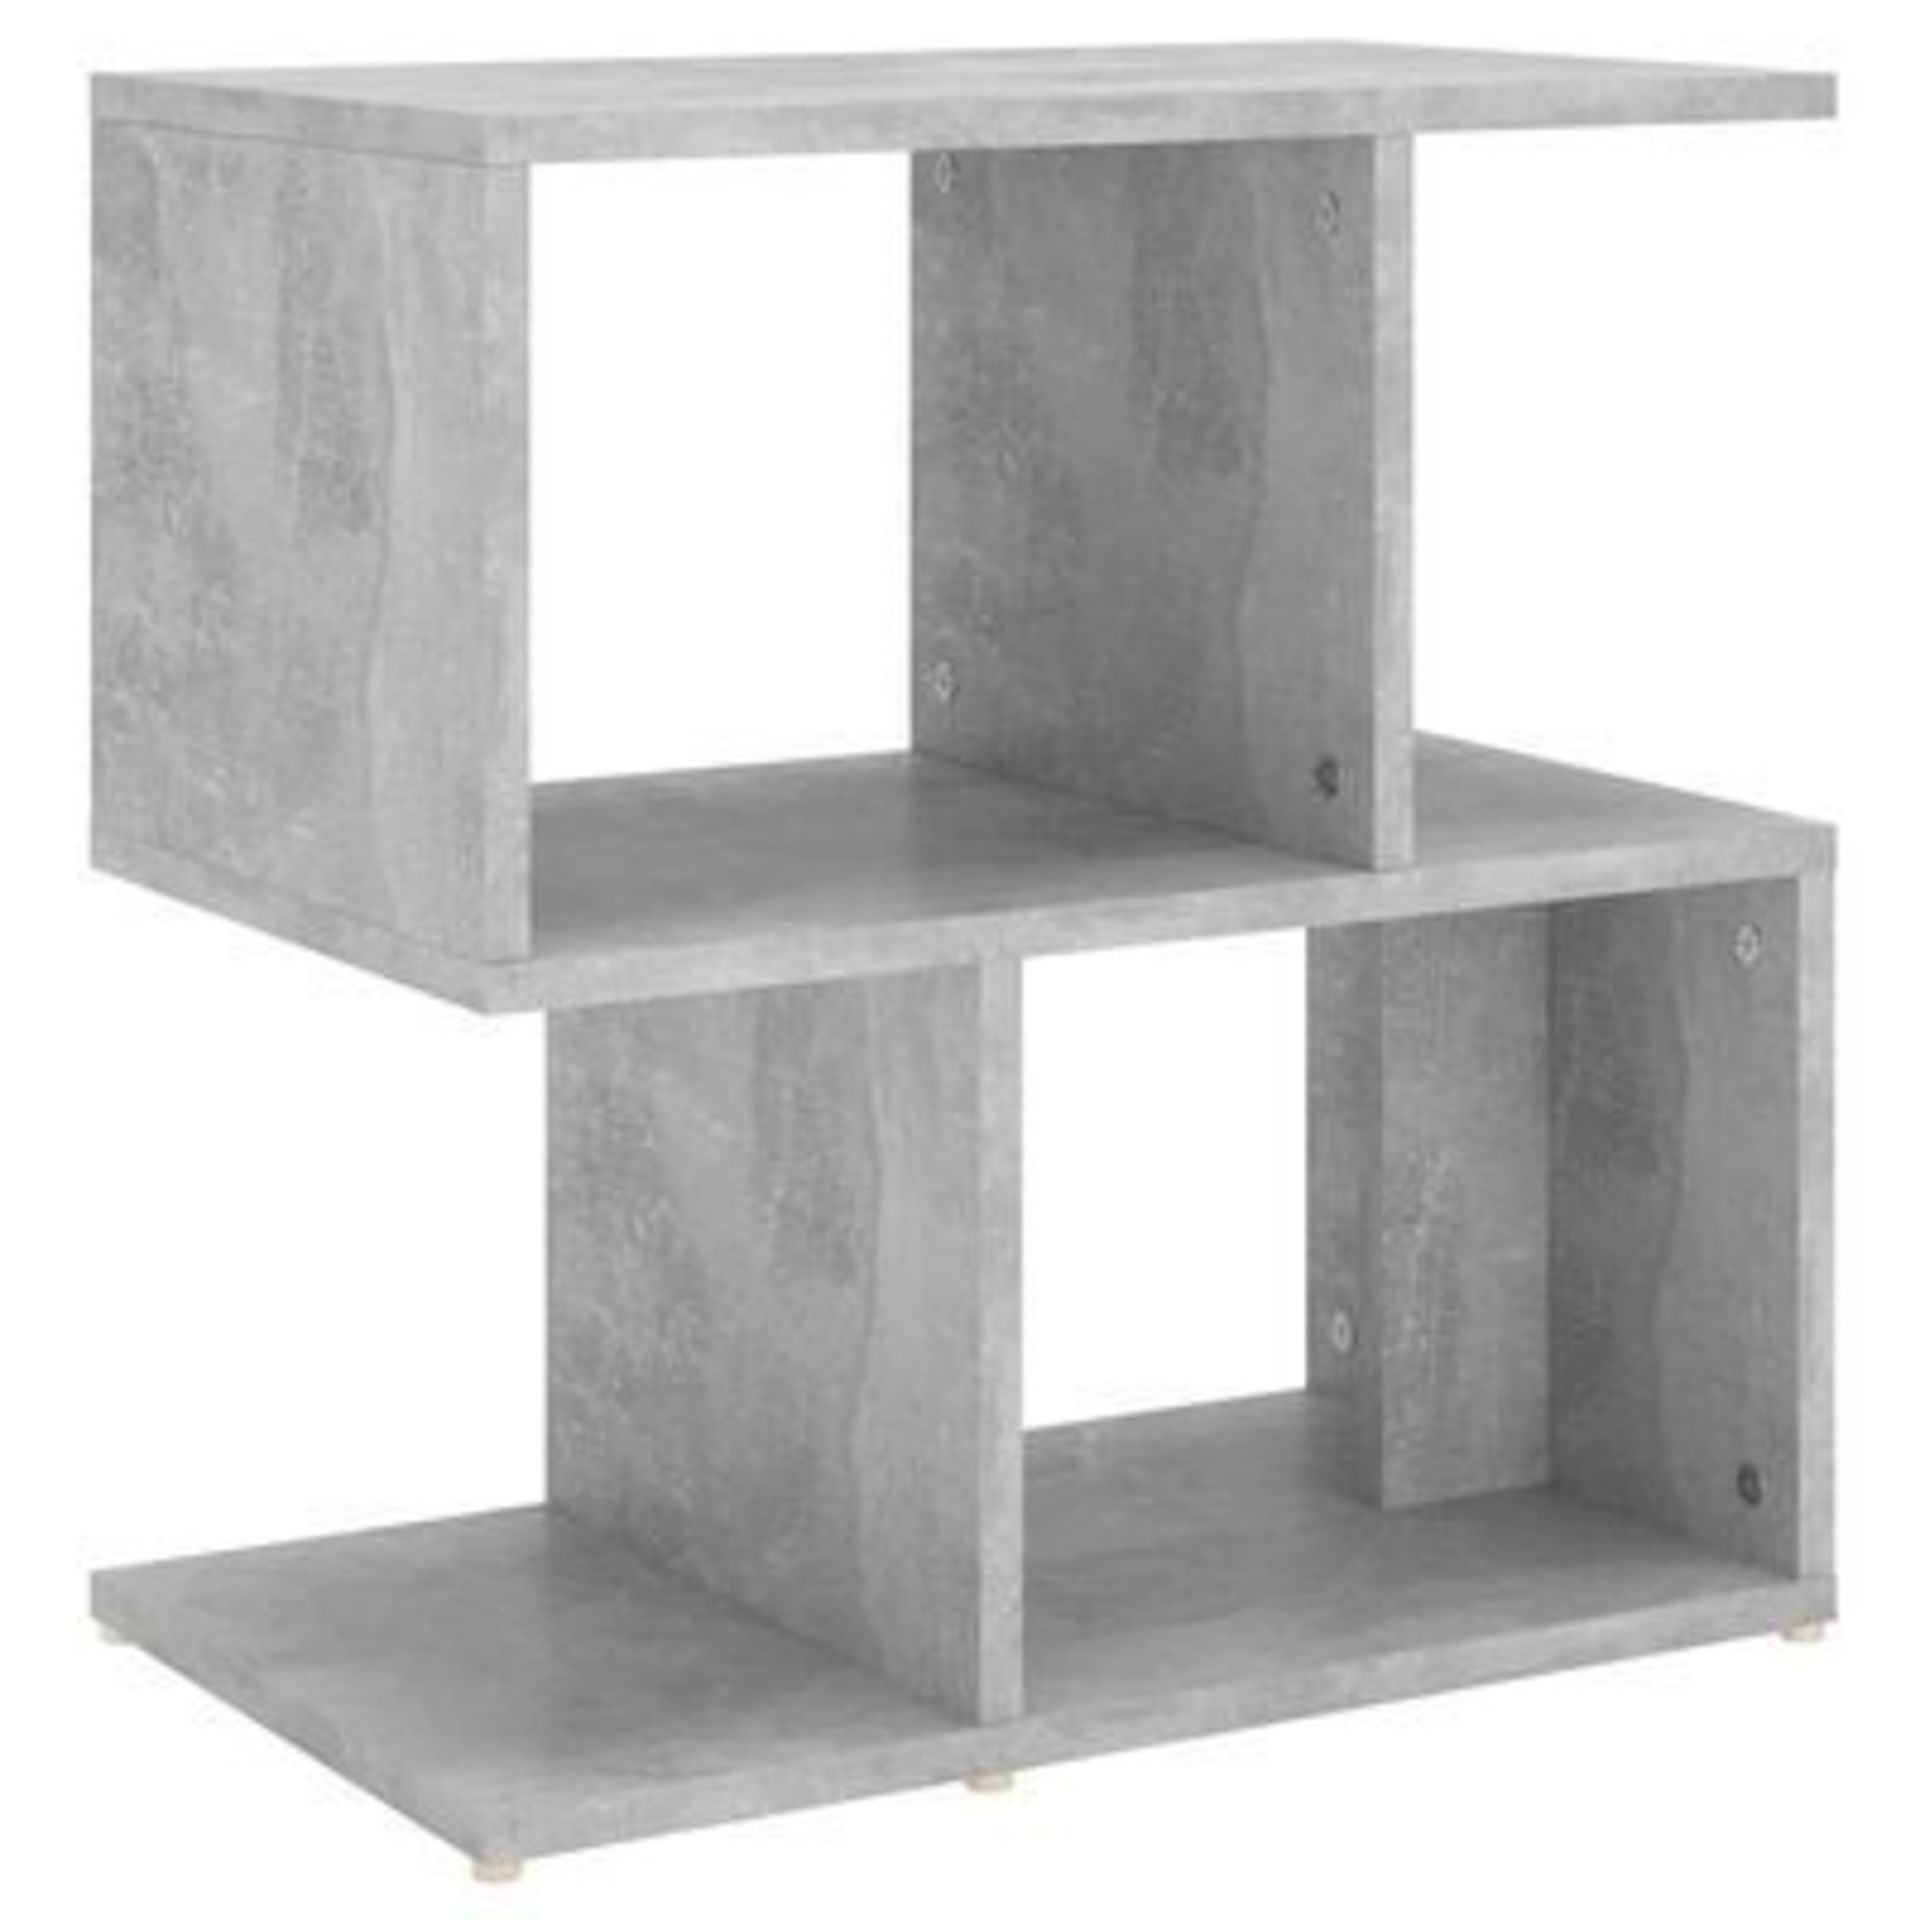 vidaXL Bedside Cabinet Concrete Grey 50x30x51.5 cm Engineered Wood. - R13a.7. The stable bed - Image 2 of 2